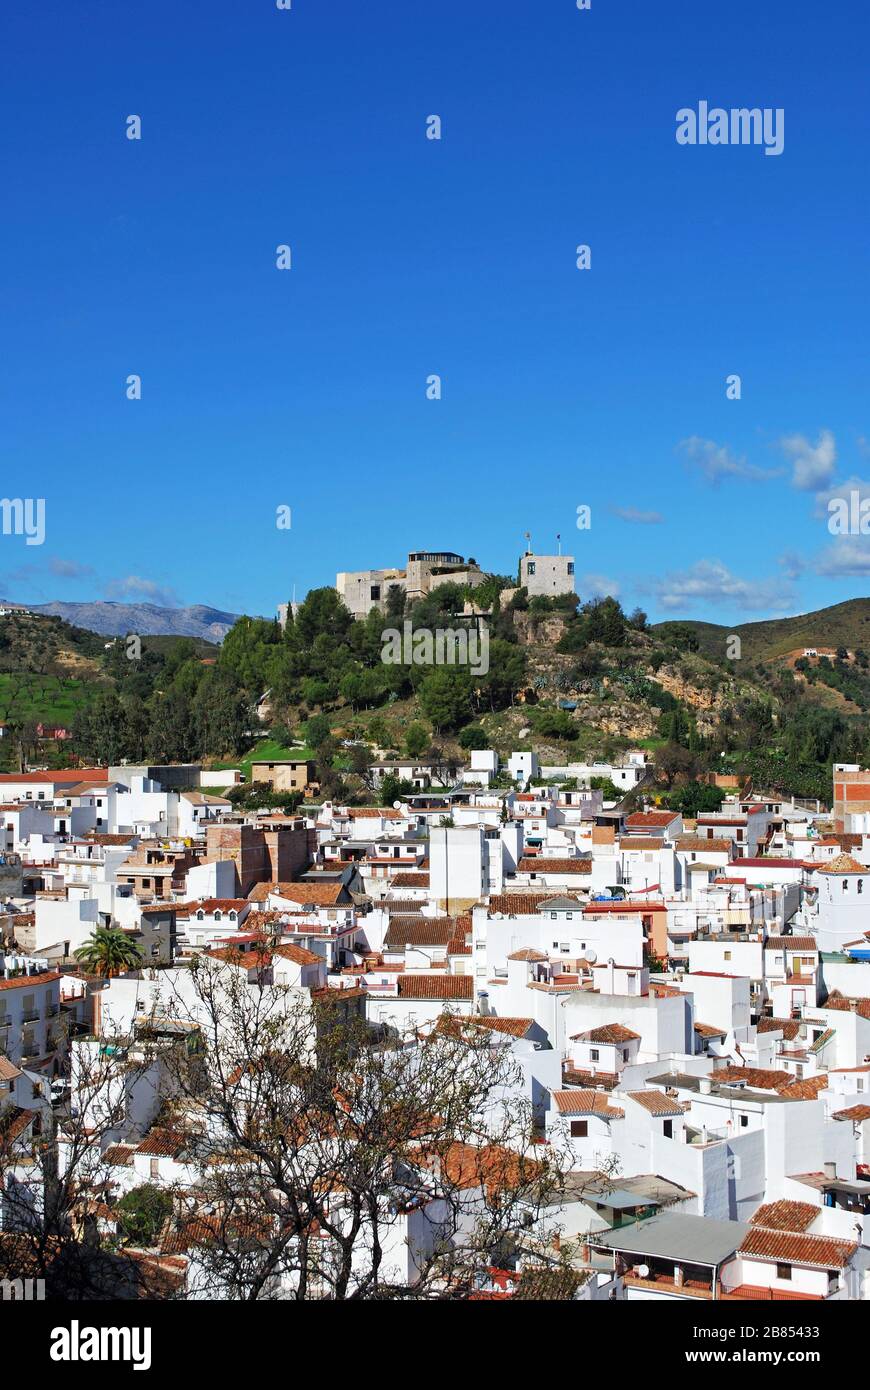 General view of the town with the castle on the hilltop, Monda, Malaga Province, Andalusia, Spain, Western Europe. Stock Photo